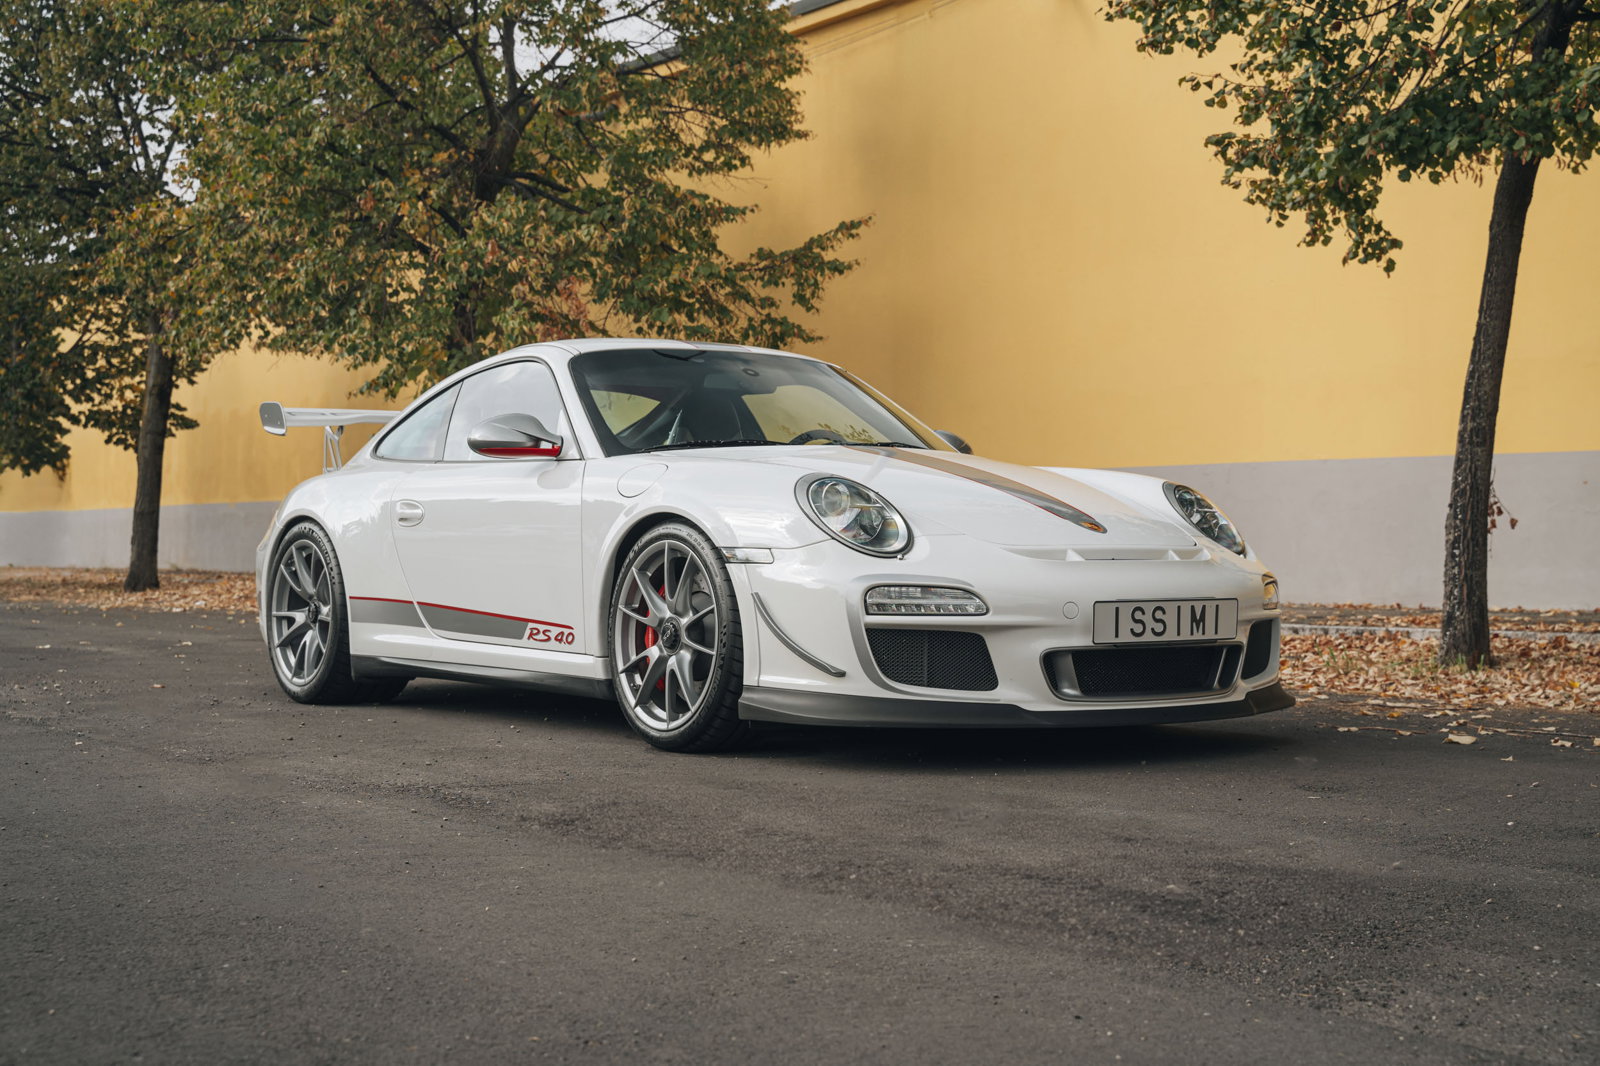 2011 Porsche 911 GT3 RS 4.0 sold at ISSIMI